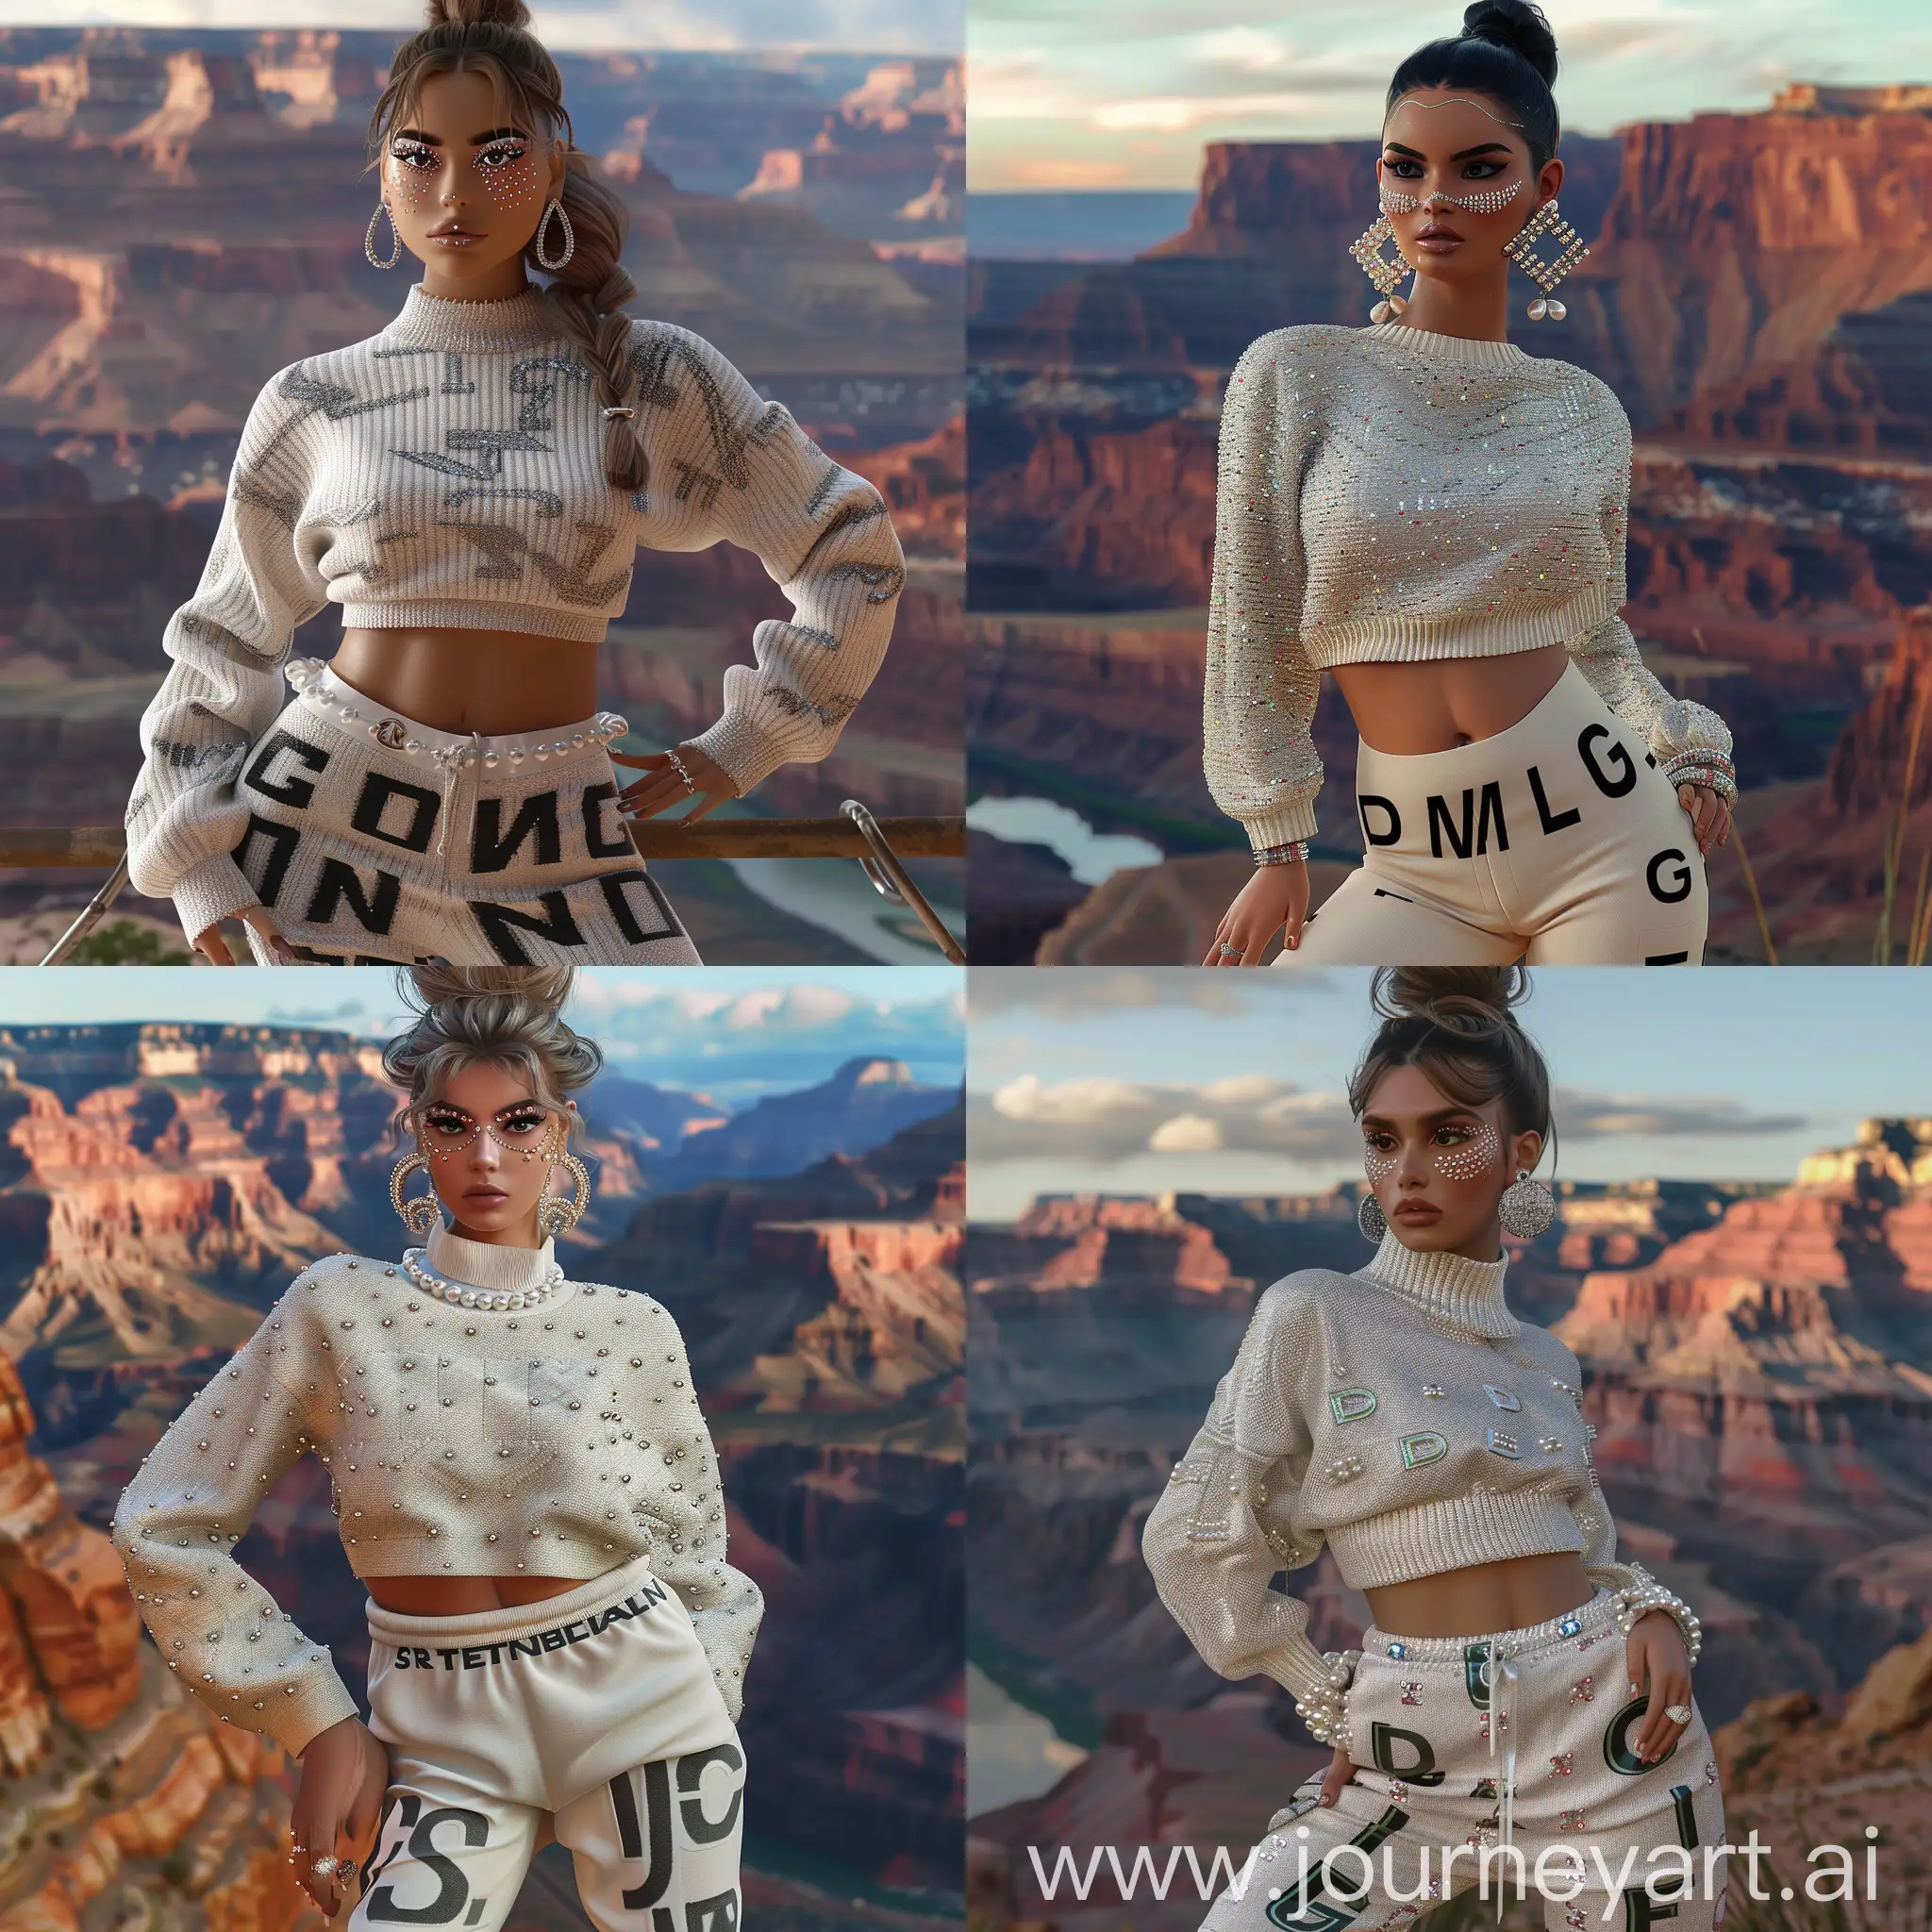 Fashionable-Model-with-DShaped-Earrings-and-Rhinestone-Makeup-Against-Grand-Canyon-Backdrop